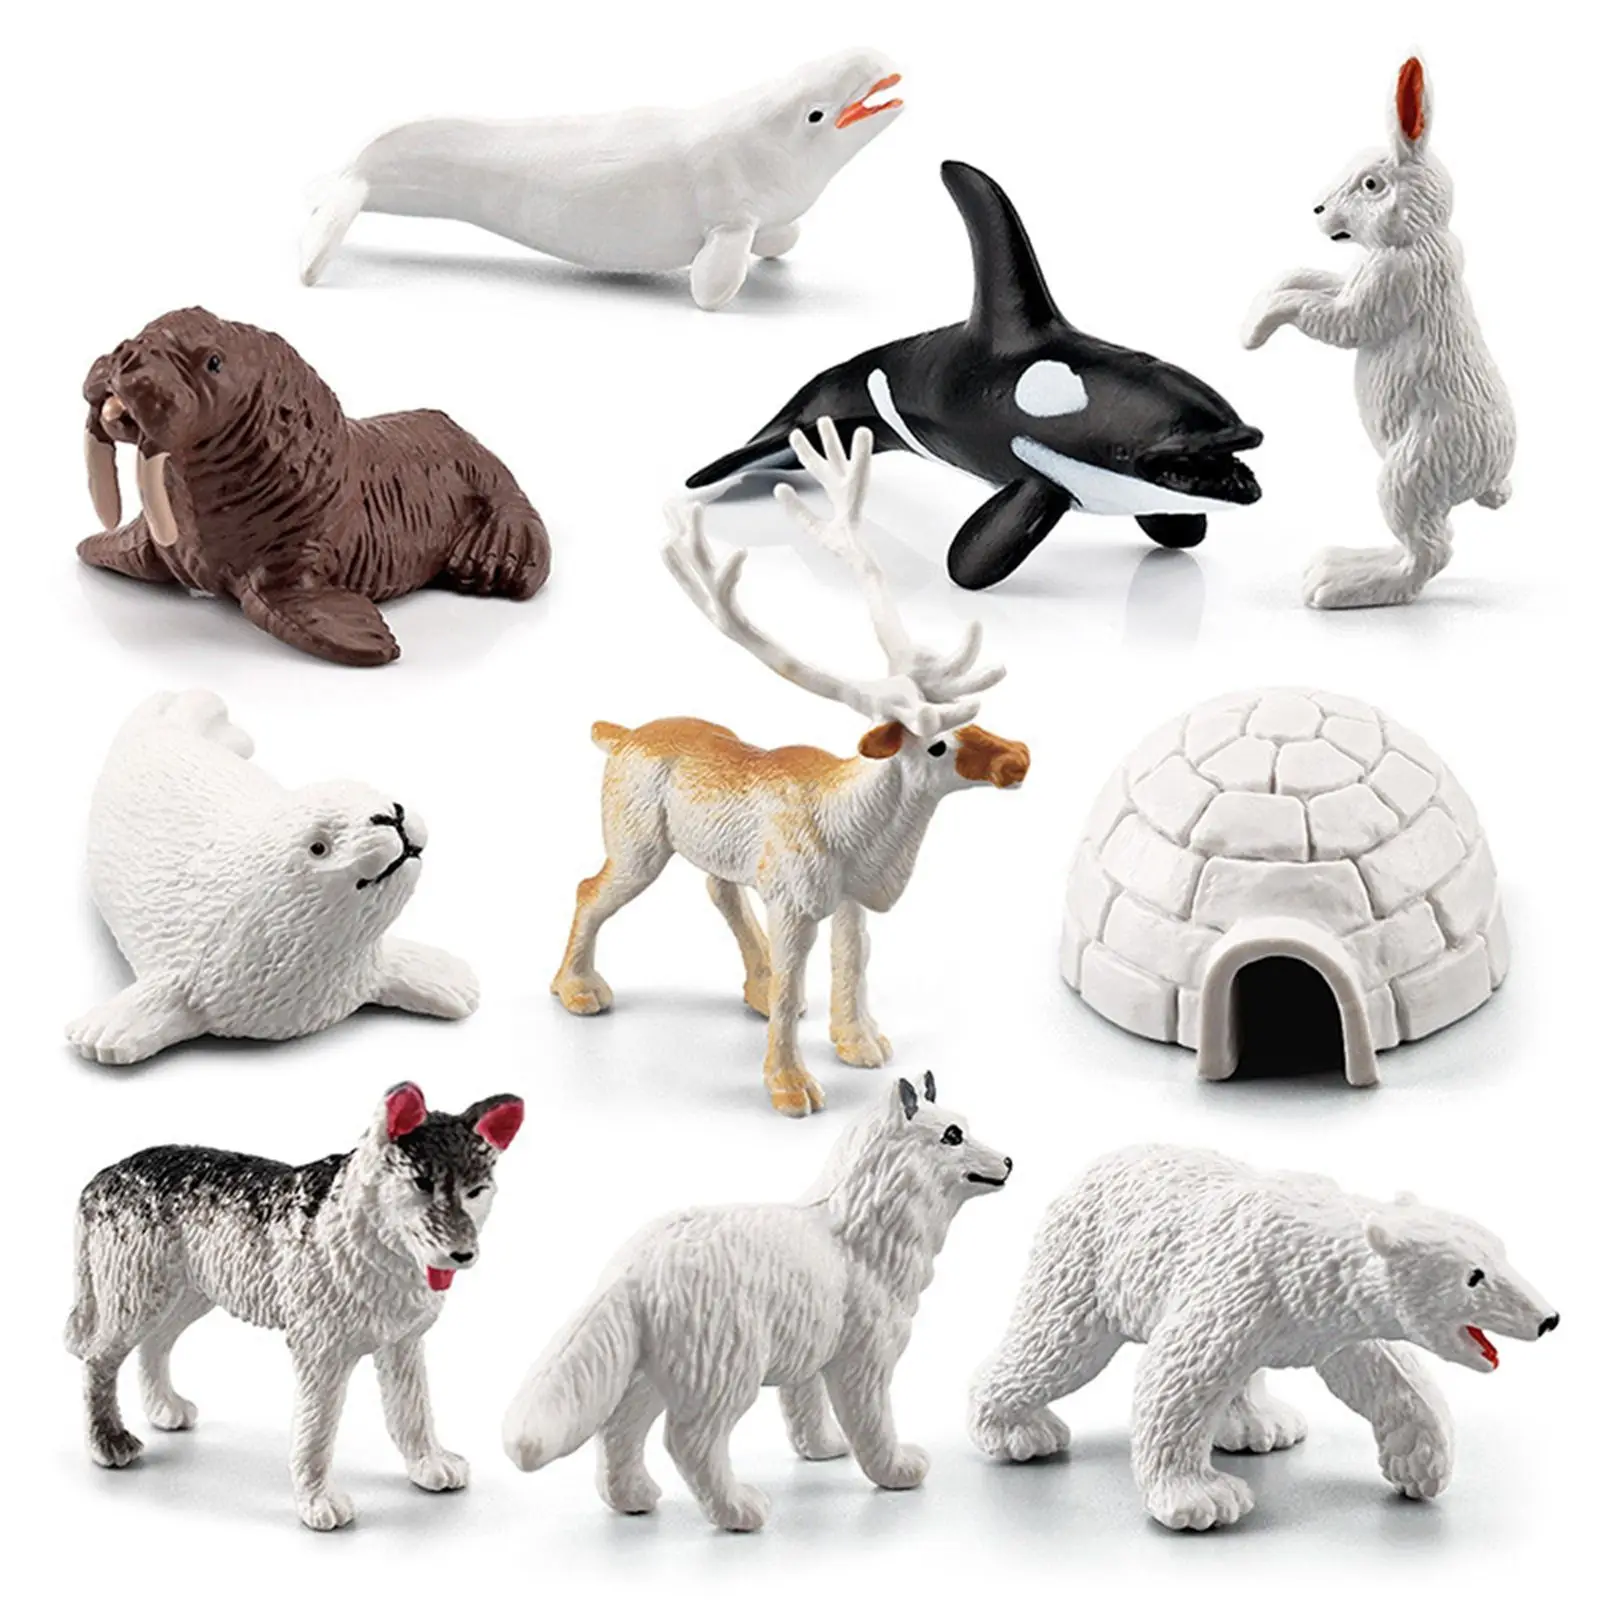 10x Lifelike Arctic Animal Model Display Props Mini Figurines Models Toys for New Year Birthday Christmas Party